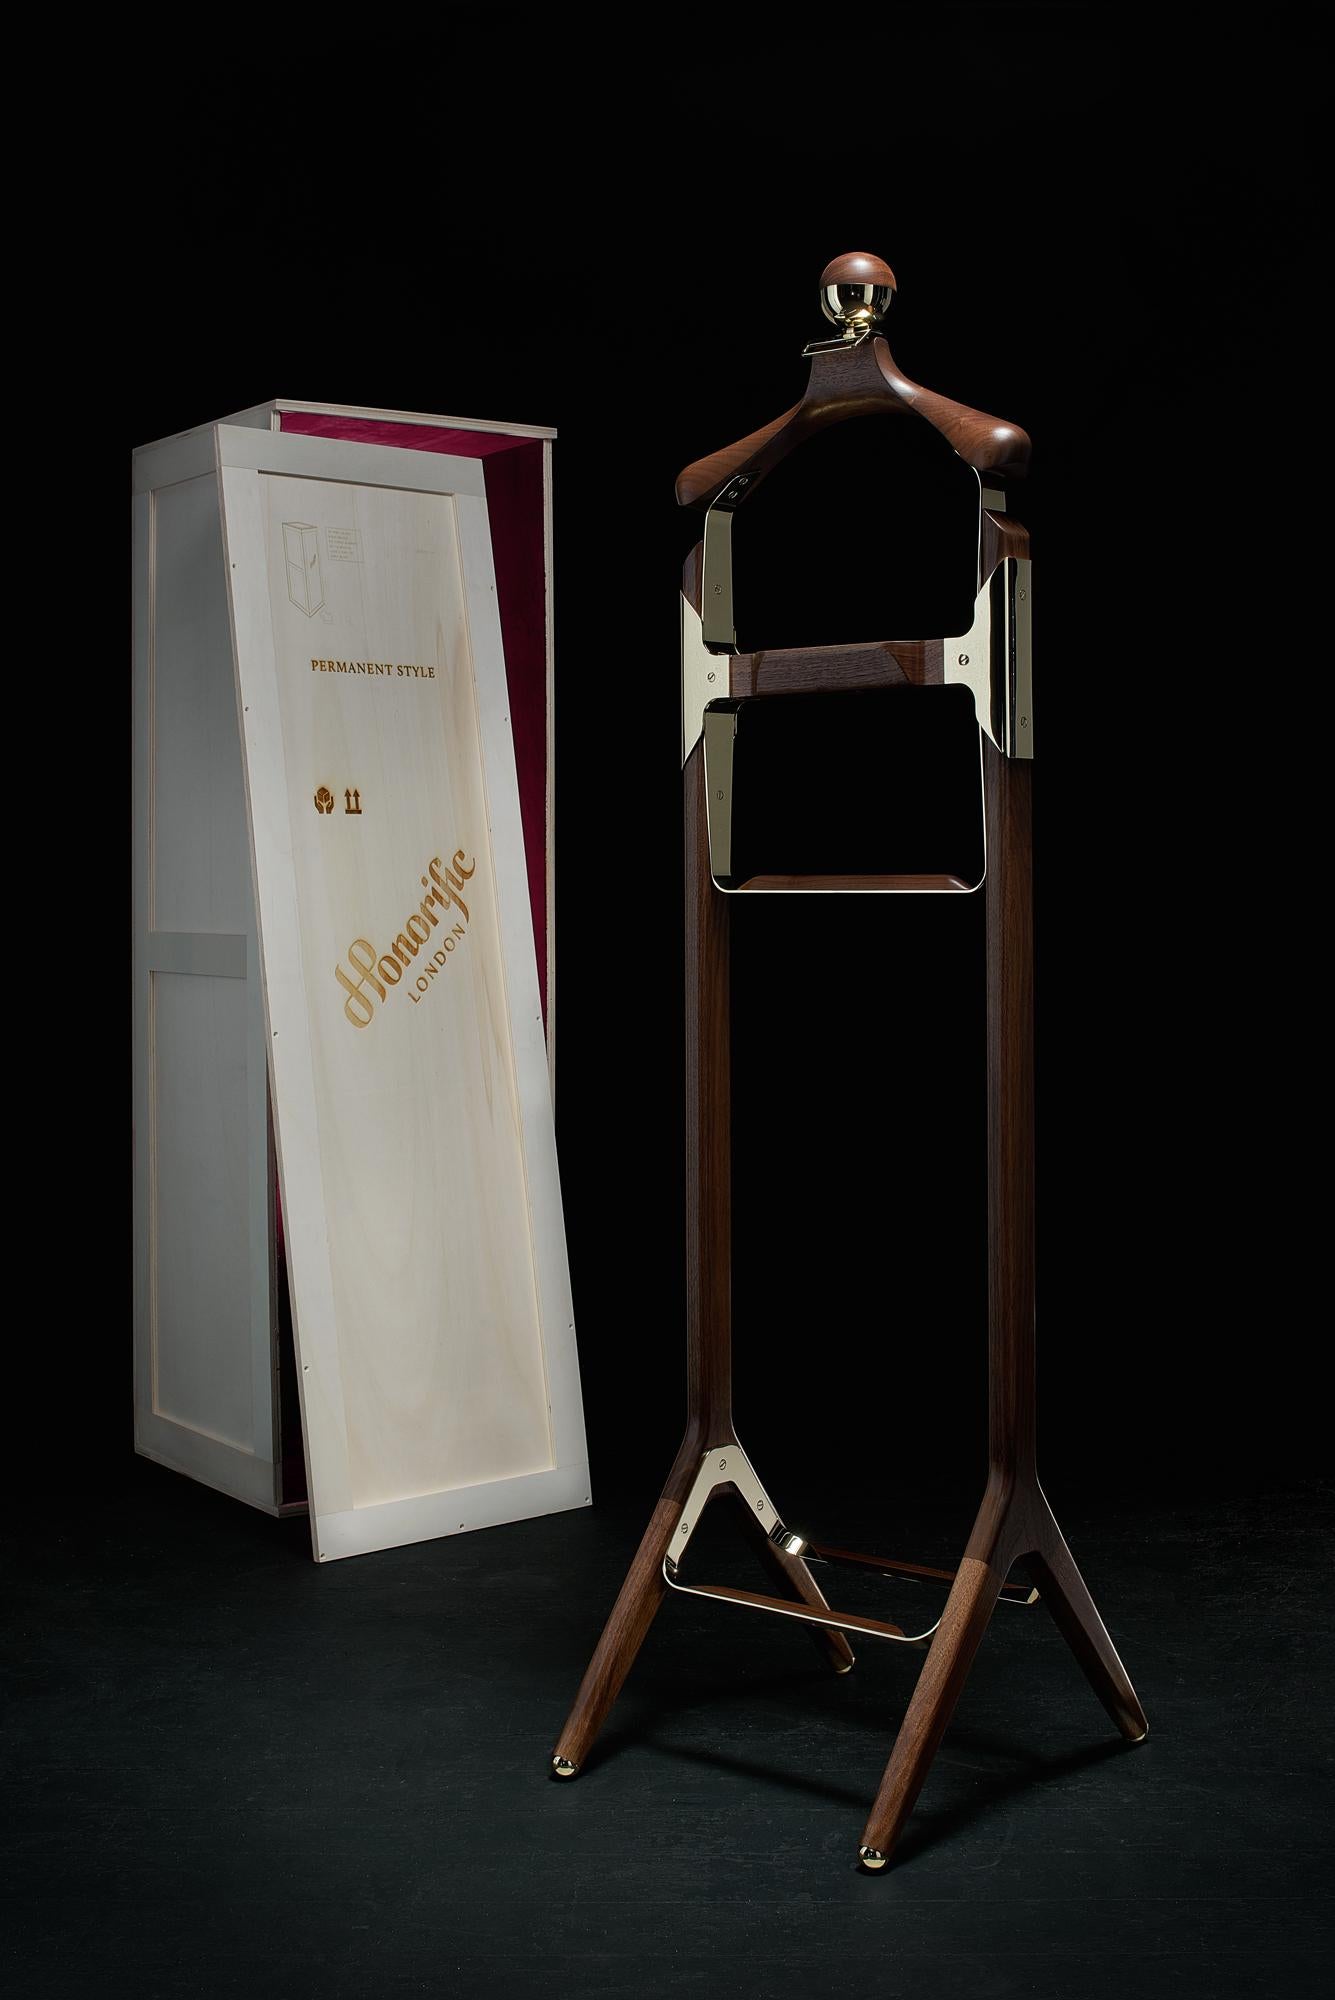 Oiled Permanent Style Valet Stand by Honorific in Solid Brass and Black Walnut For Sale